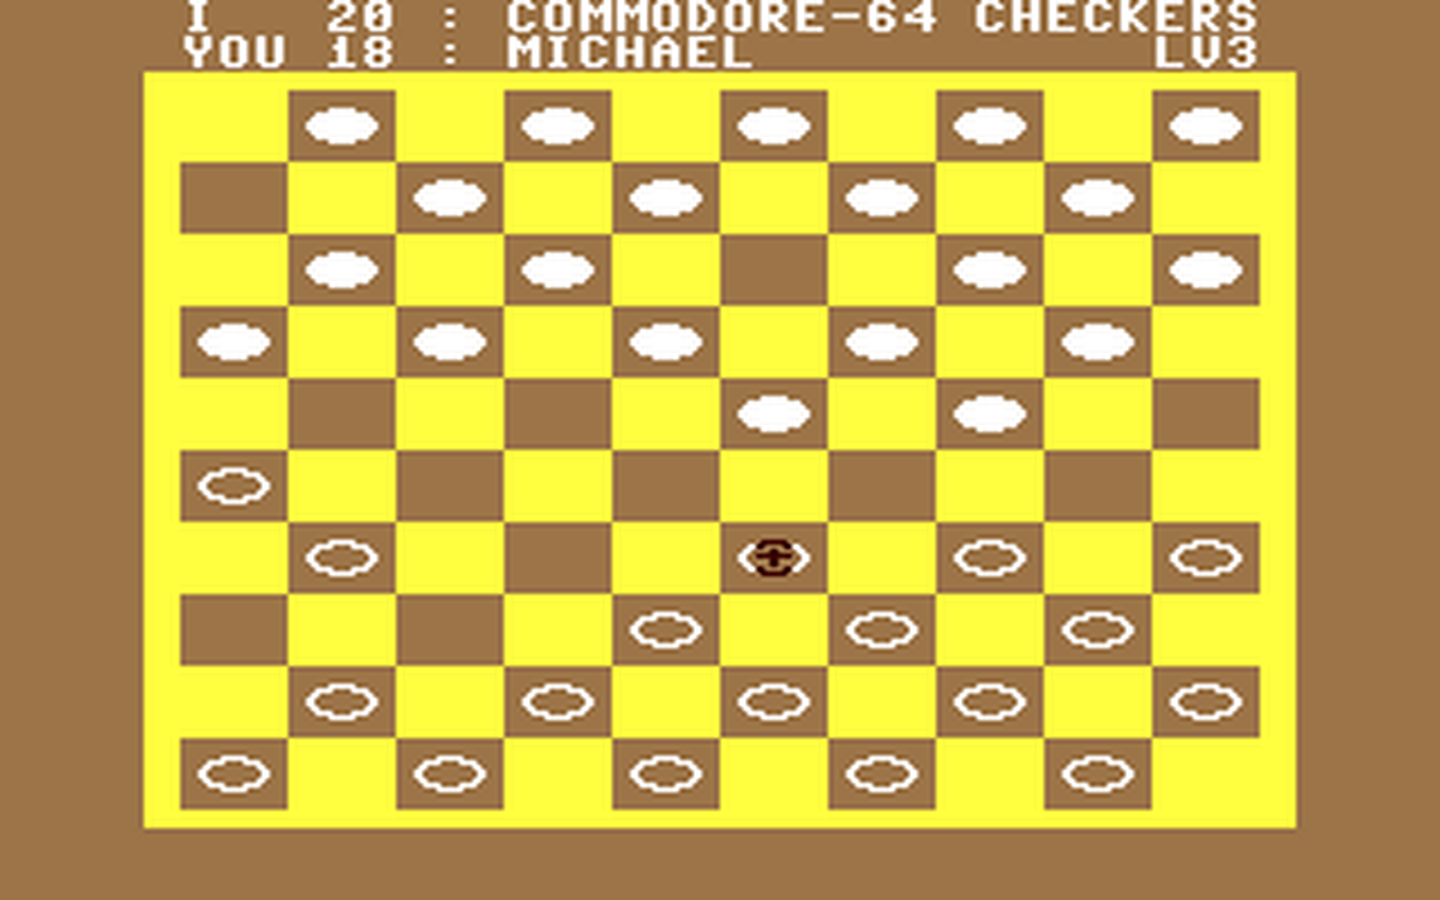 C64 GameBase Checkers Yu-Can_Software 1984